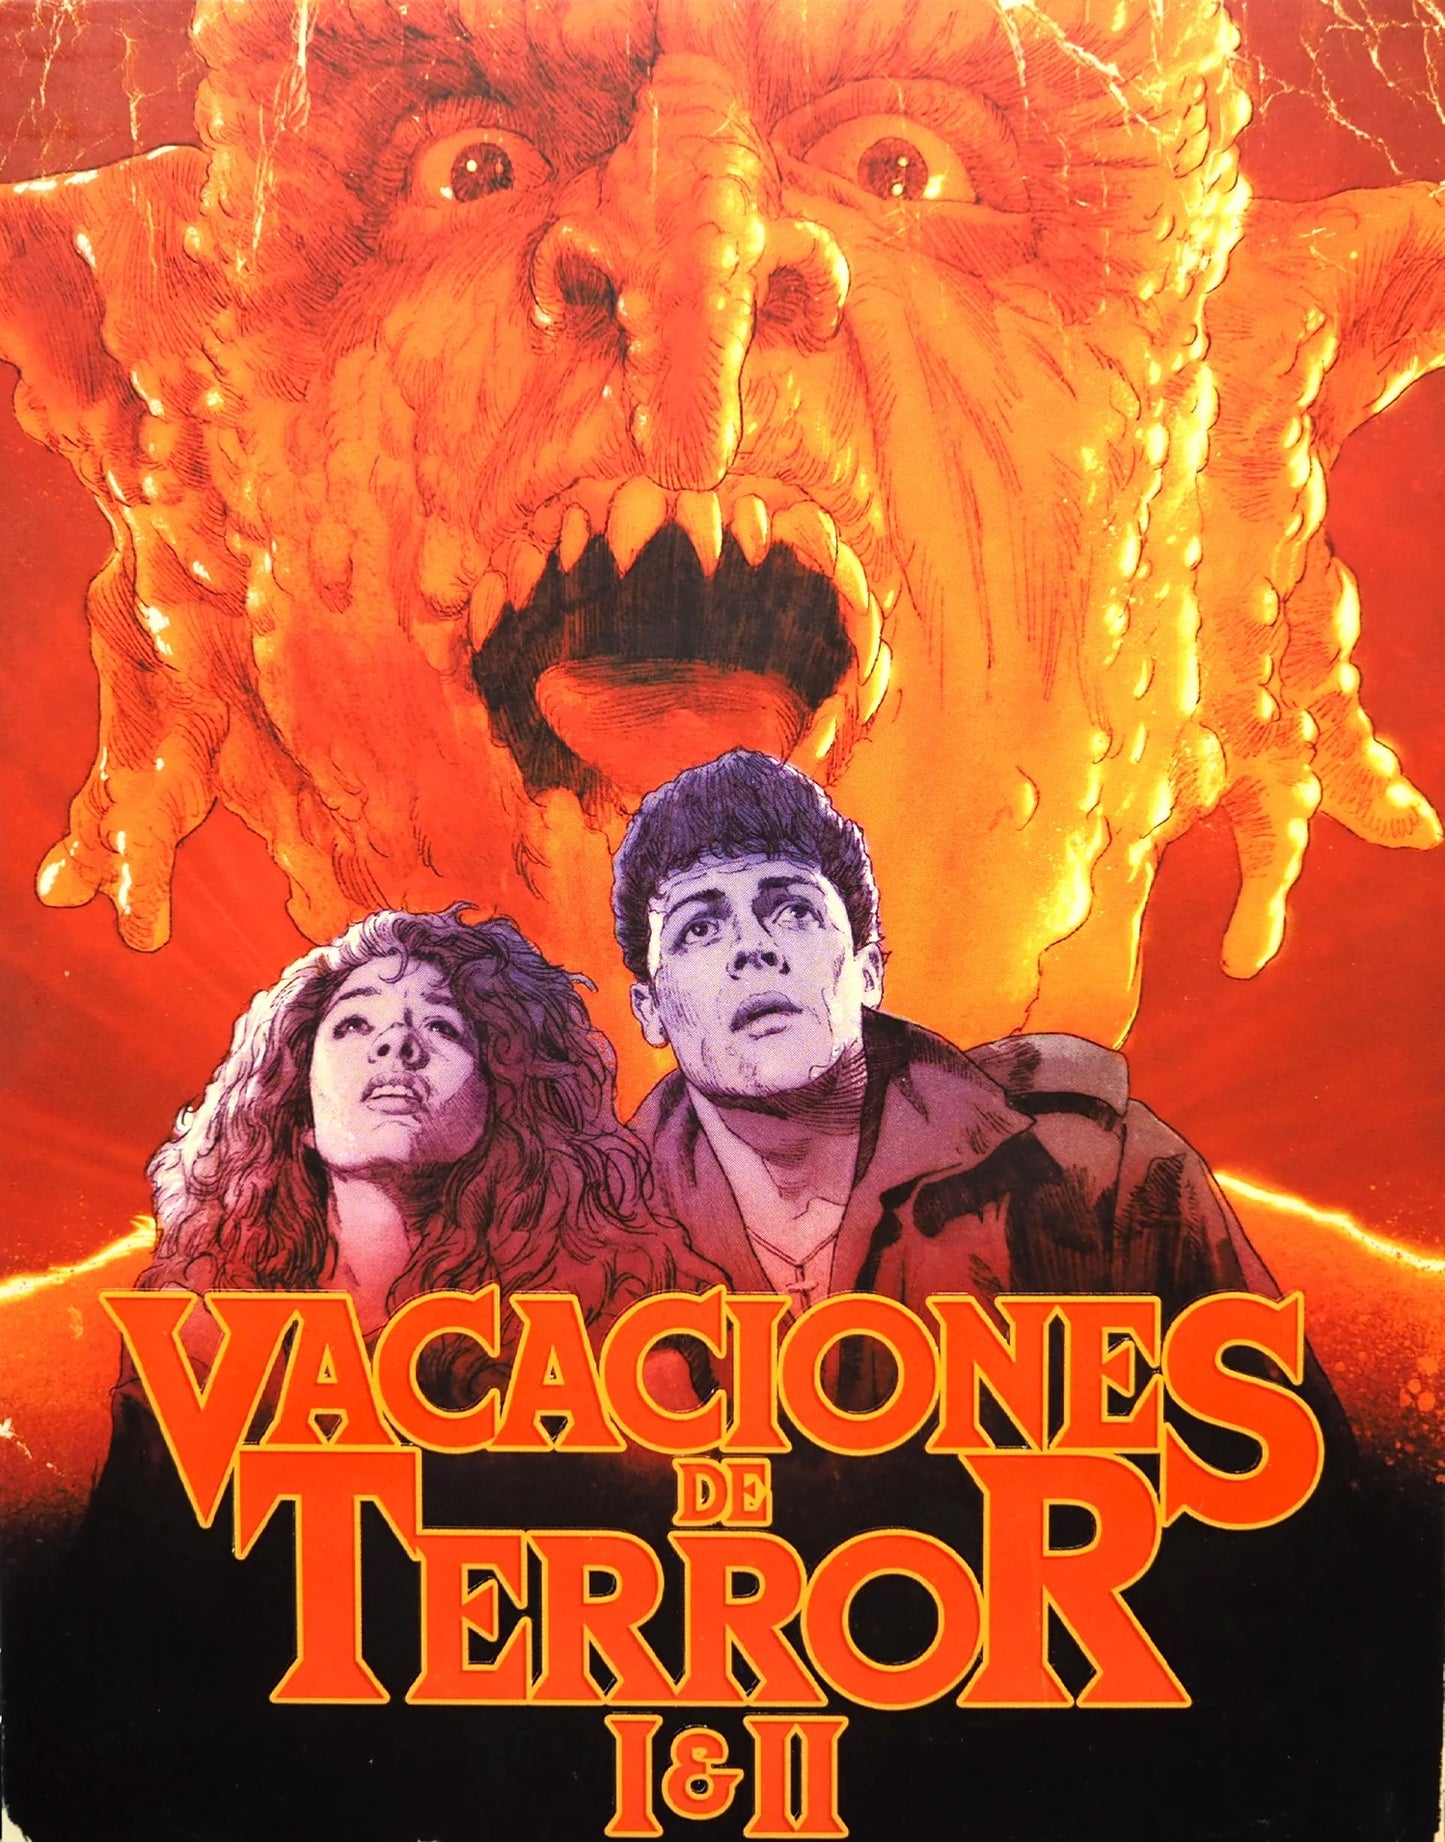 Vacation of Terror 1 & 2 Limited Edition Vinegar Syndrome Blu-Ray [NEW] [SLIPCOVER]